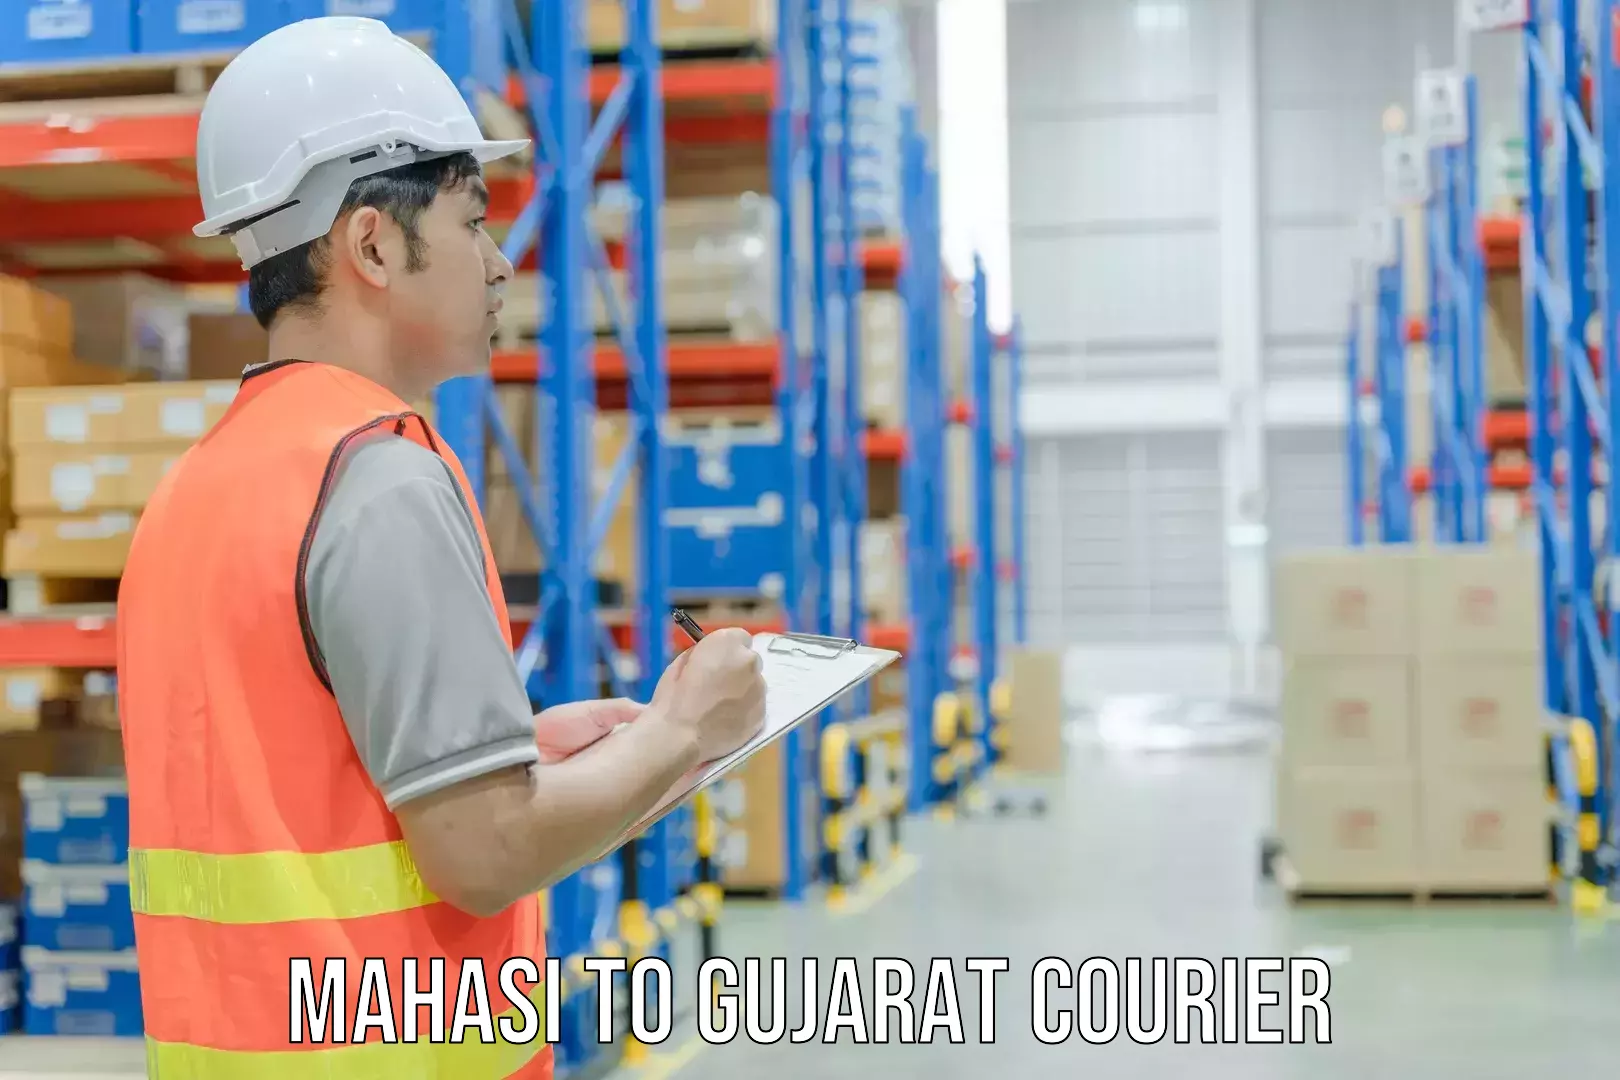 Quality courier services Mahasi to Gujarat